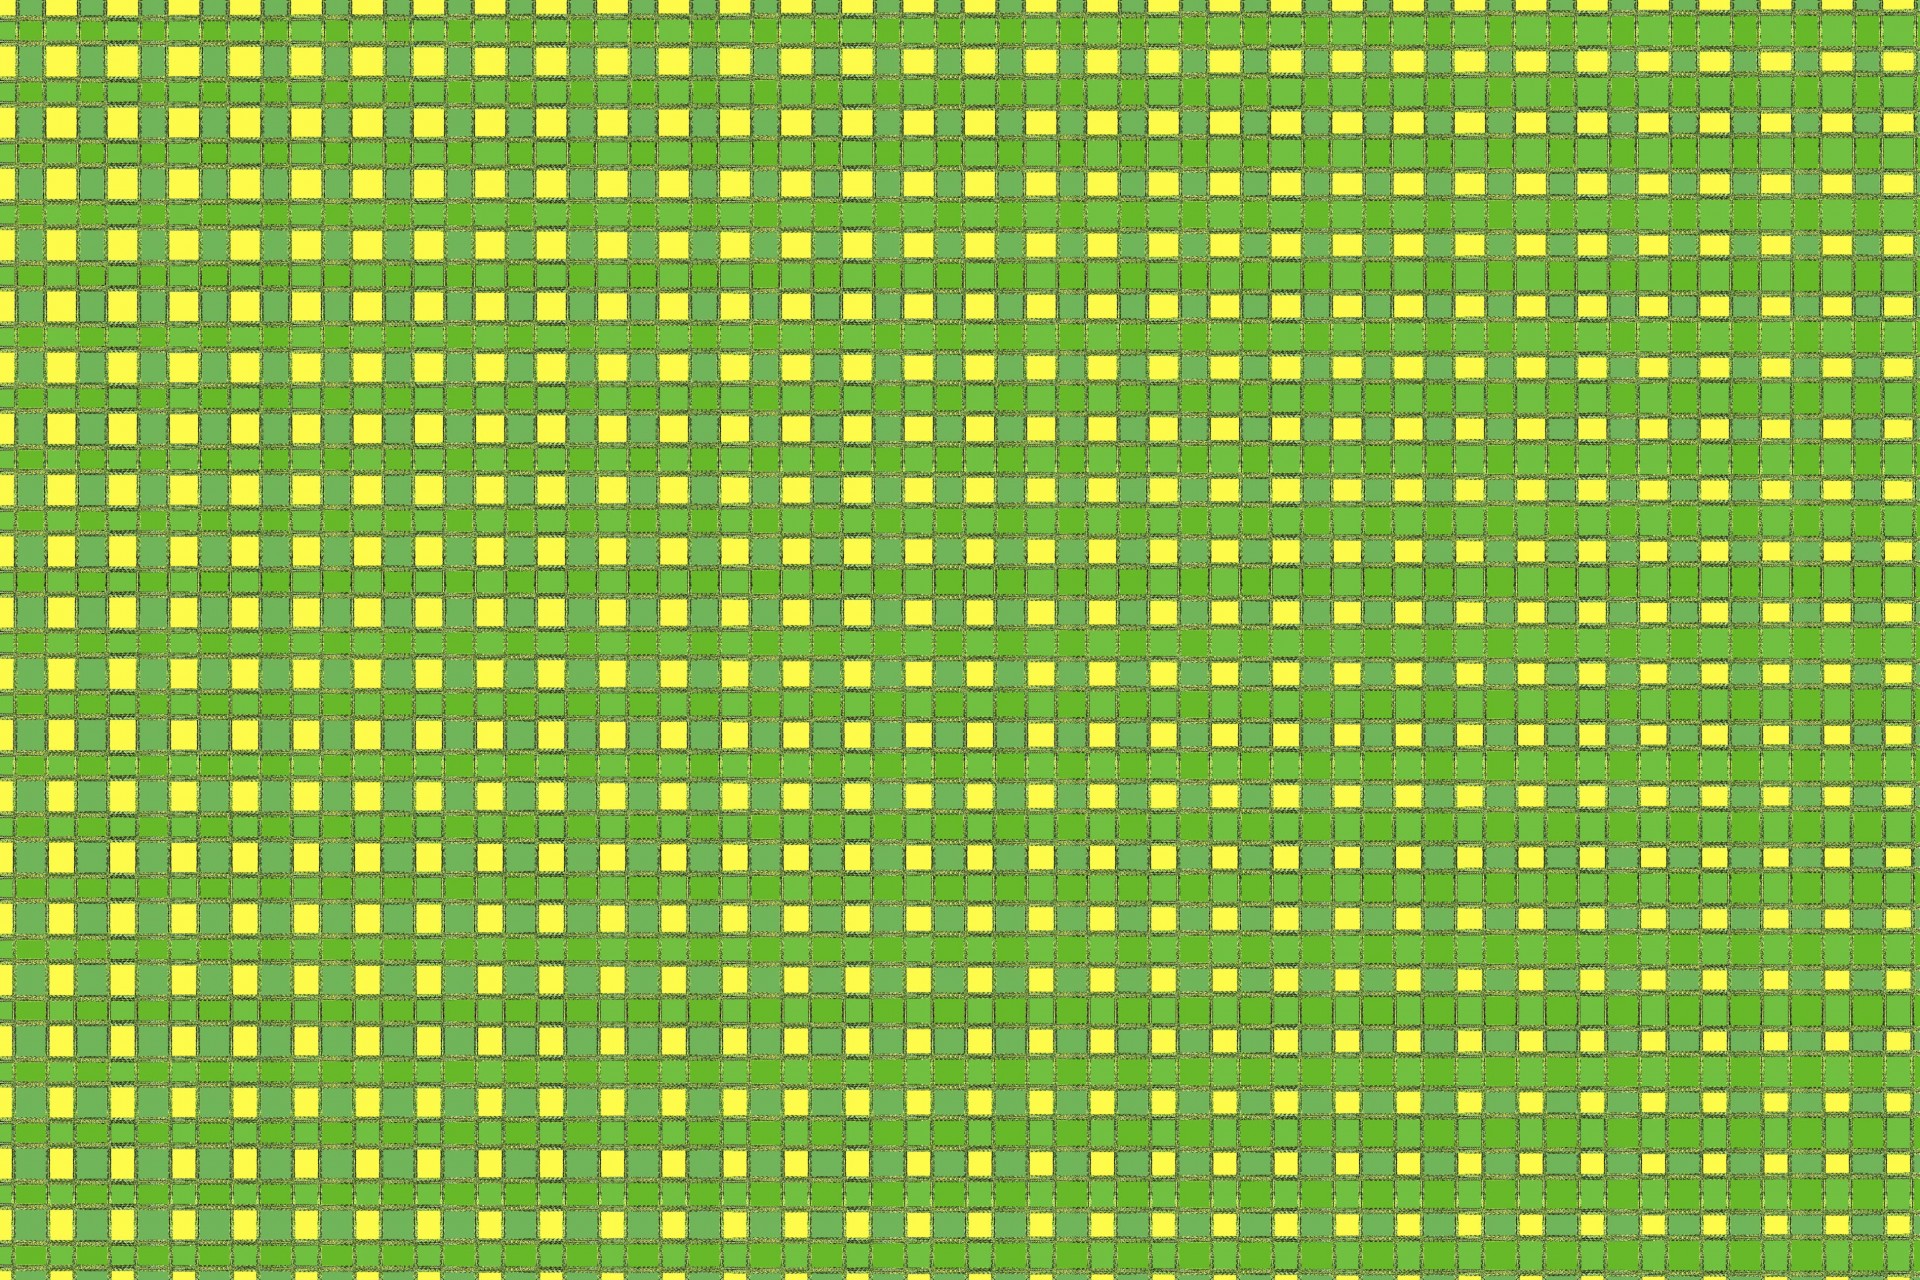 Small Blocks In Yellow And Green